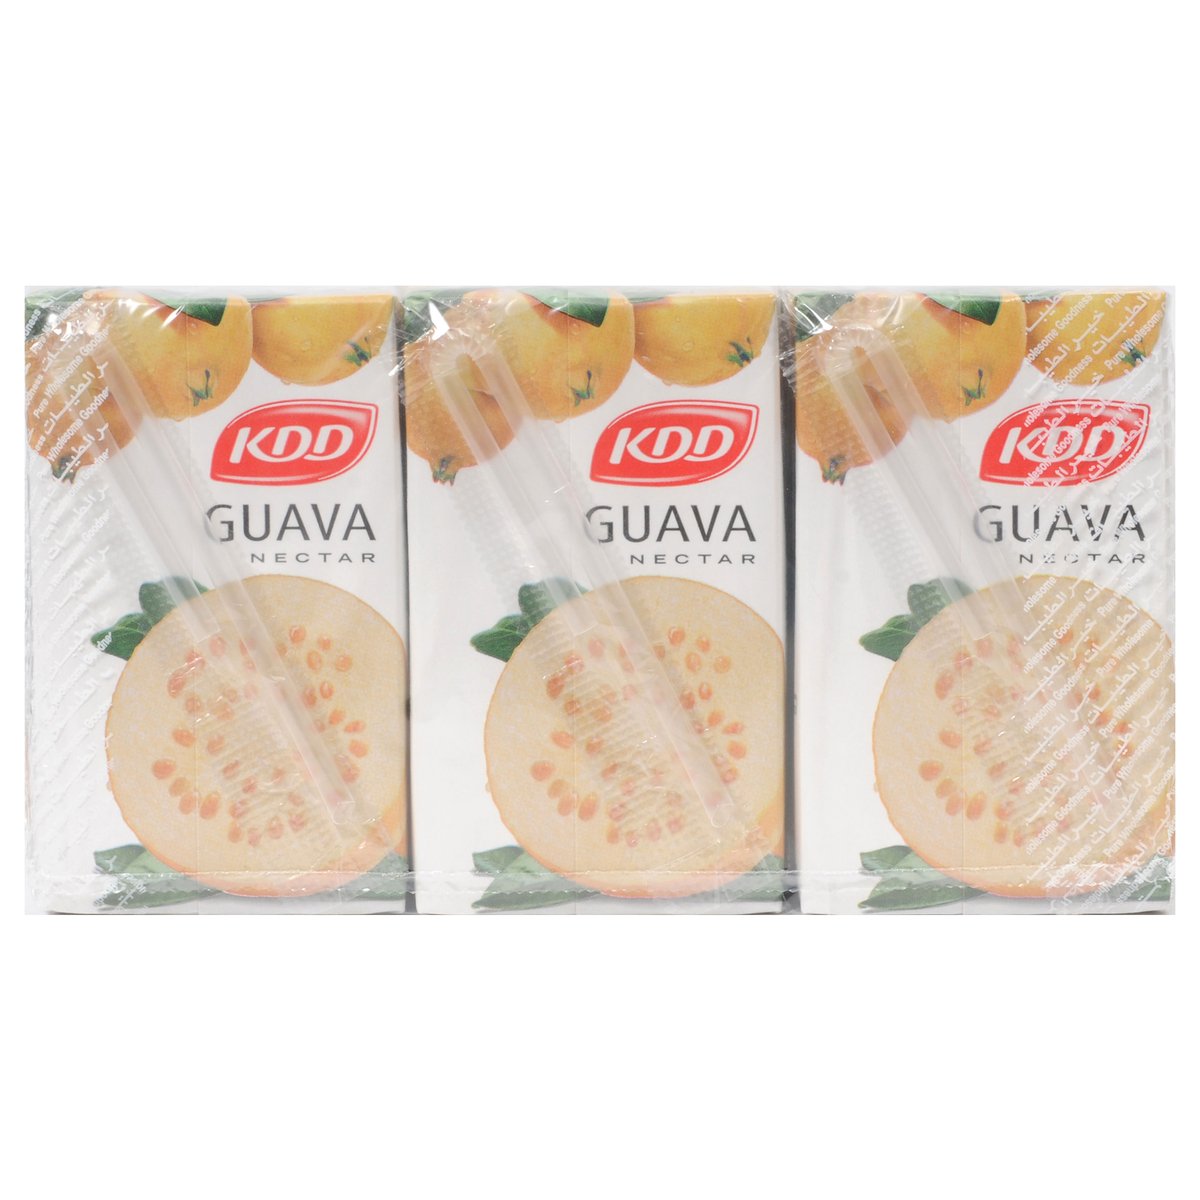 KDD Guava Nectar 250ml x 6 Pieces